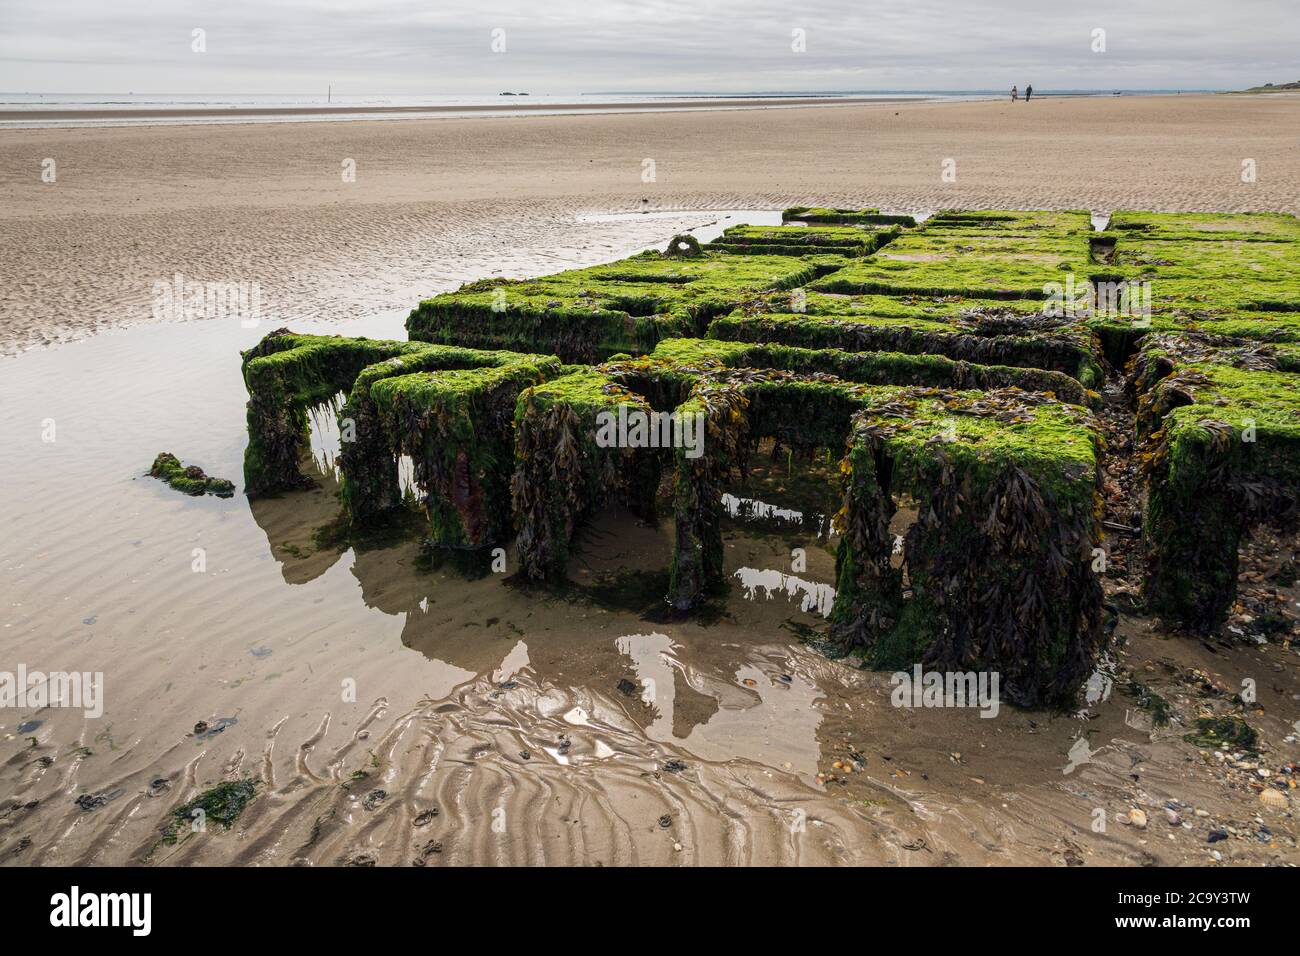 Remains of an old wartime pontoon used for the D-Day landings on Utah Beach, Normandy, France Stock Photo